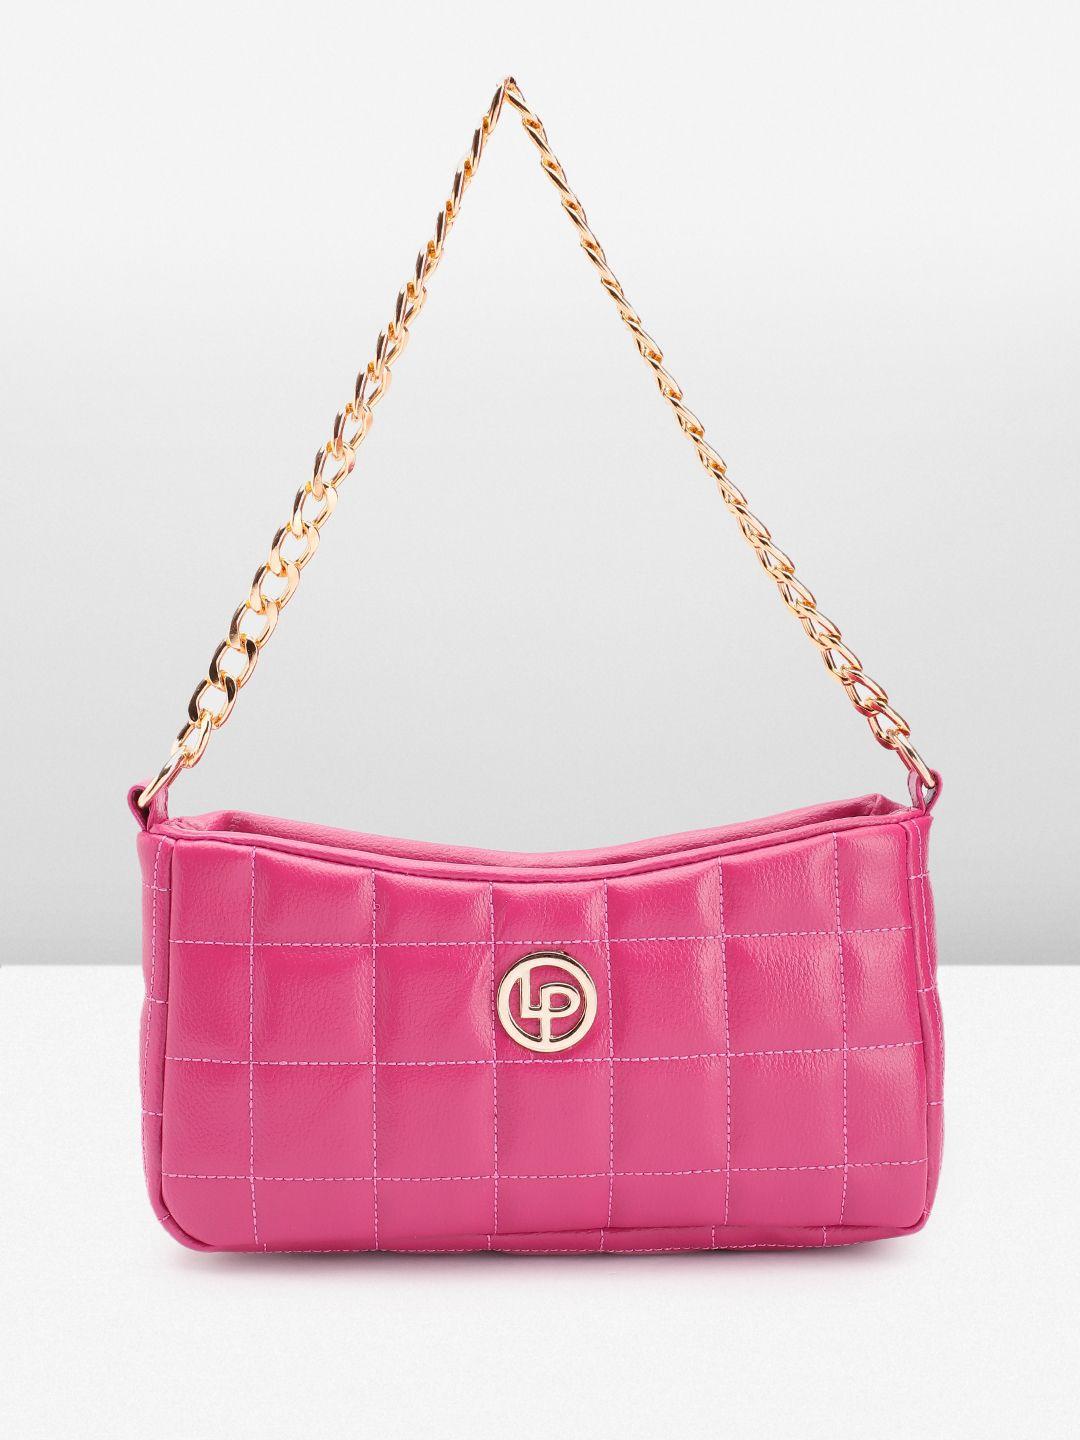 lino perros geometric textured structured shoulder bag with quilted detail